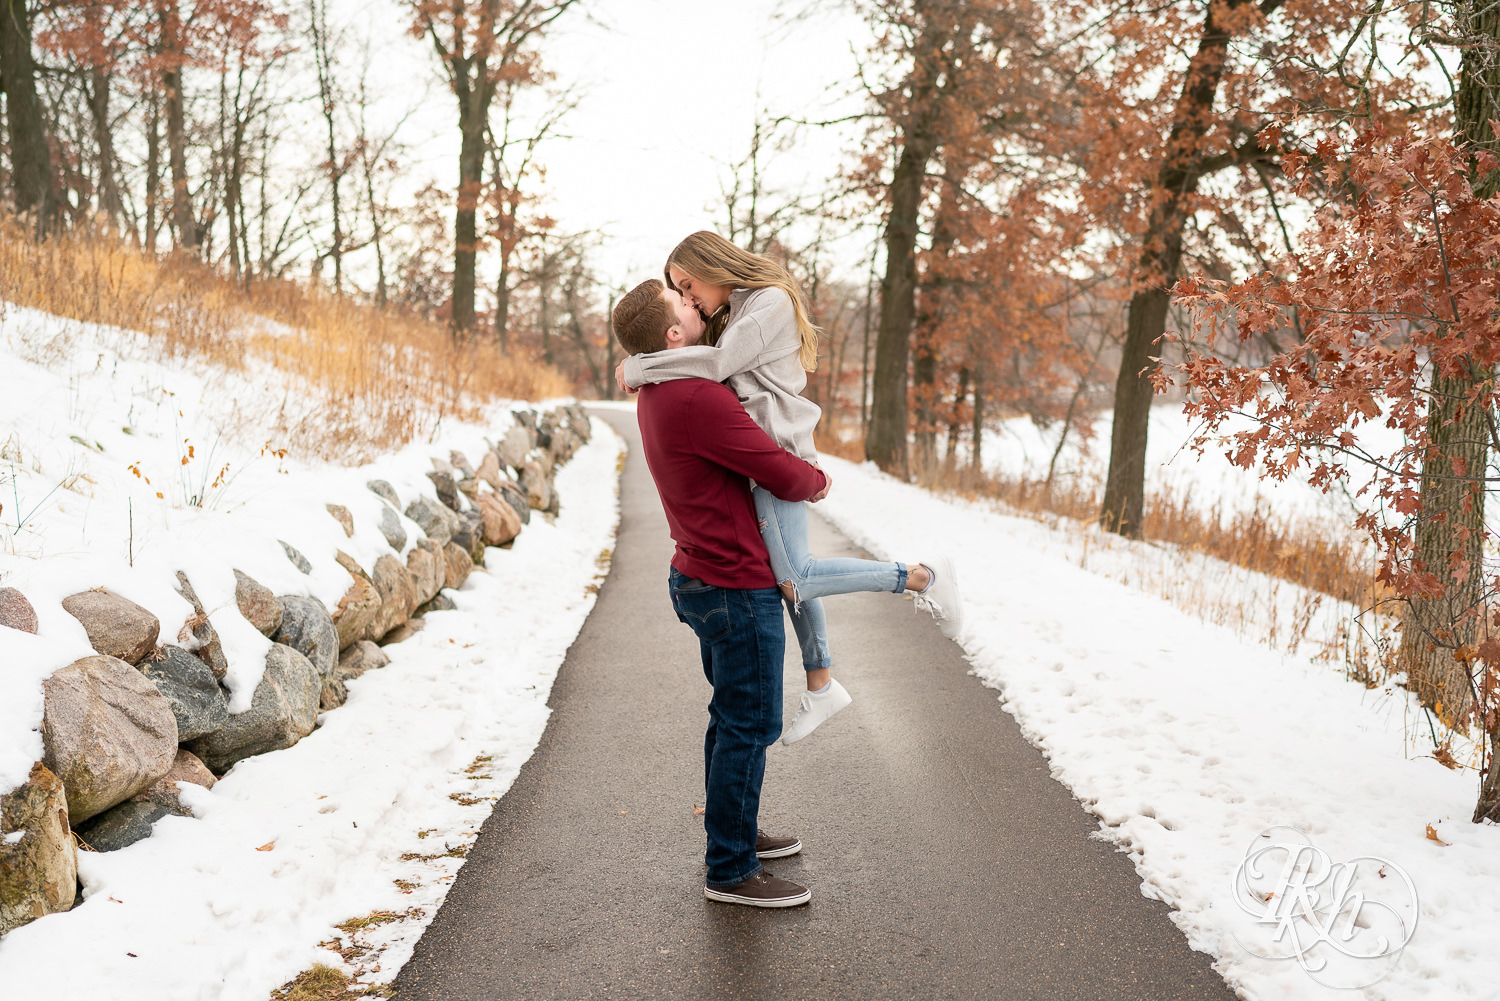 Man lifts and kisses woman in winter engagement photo